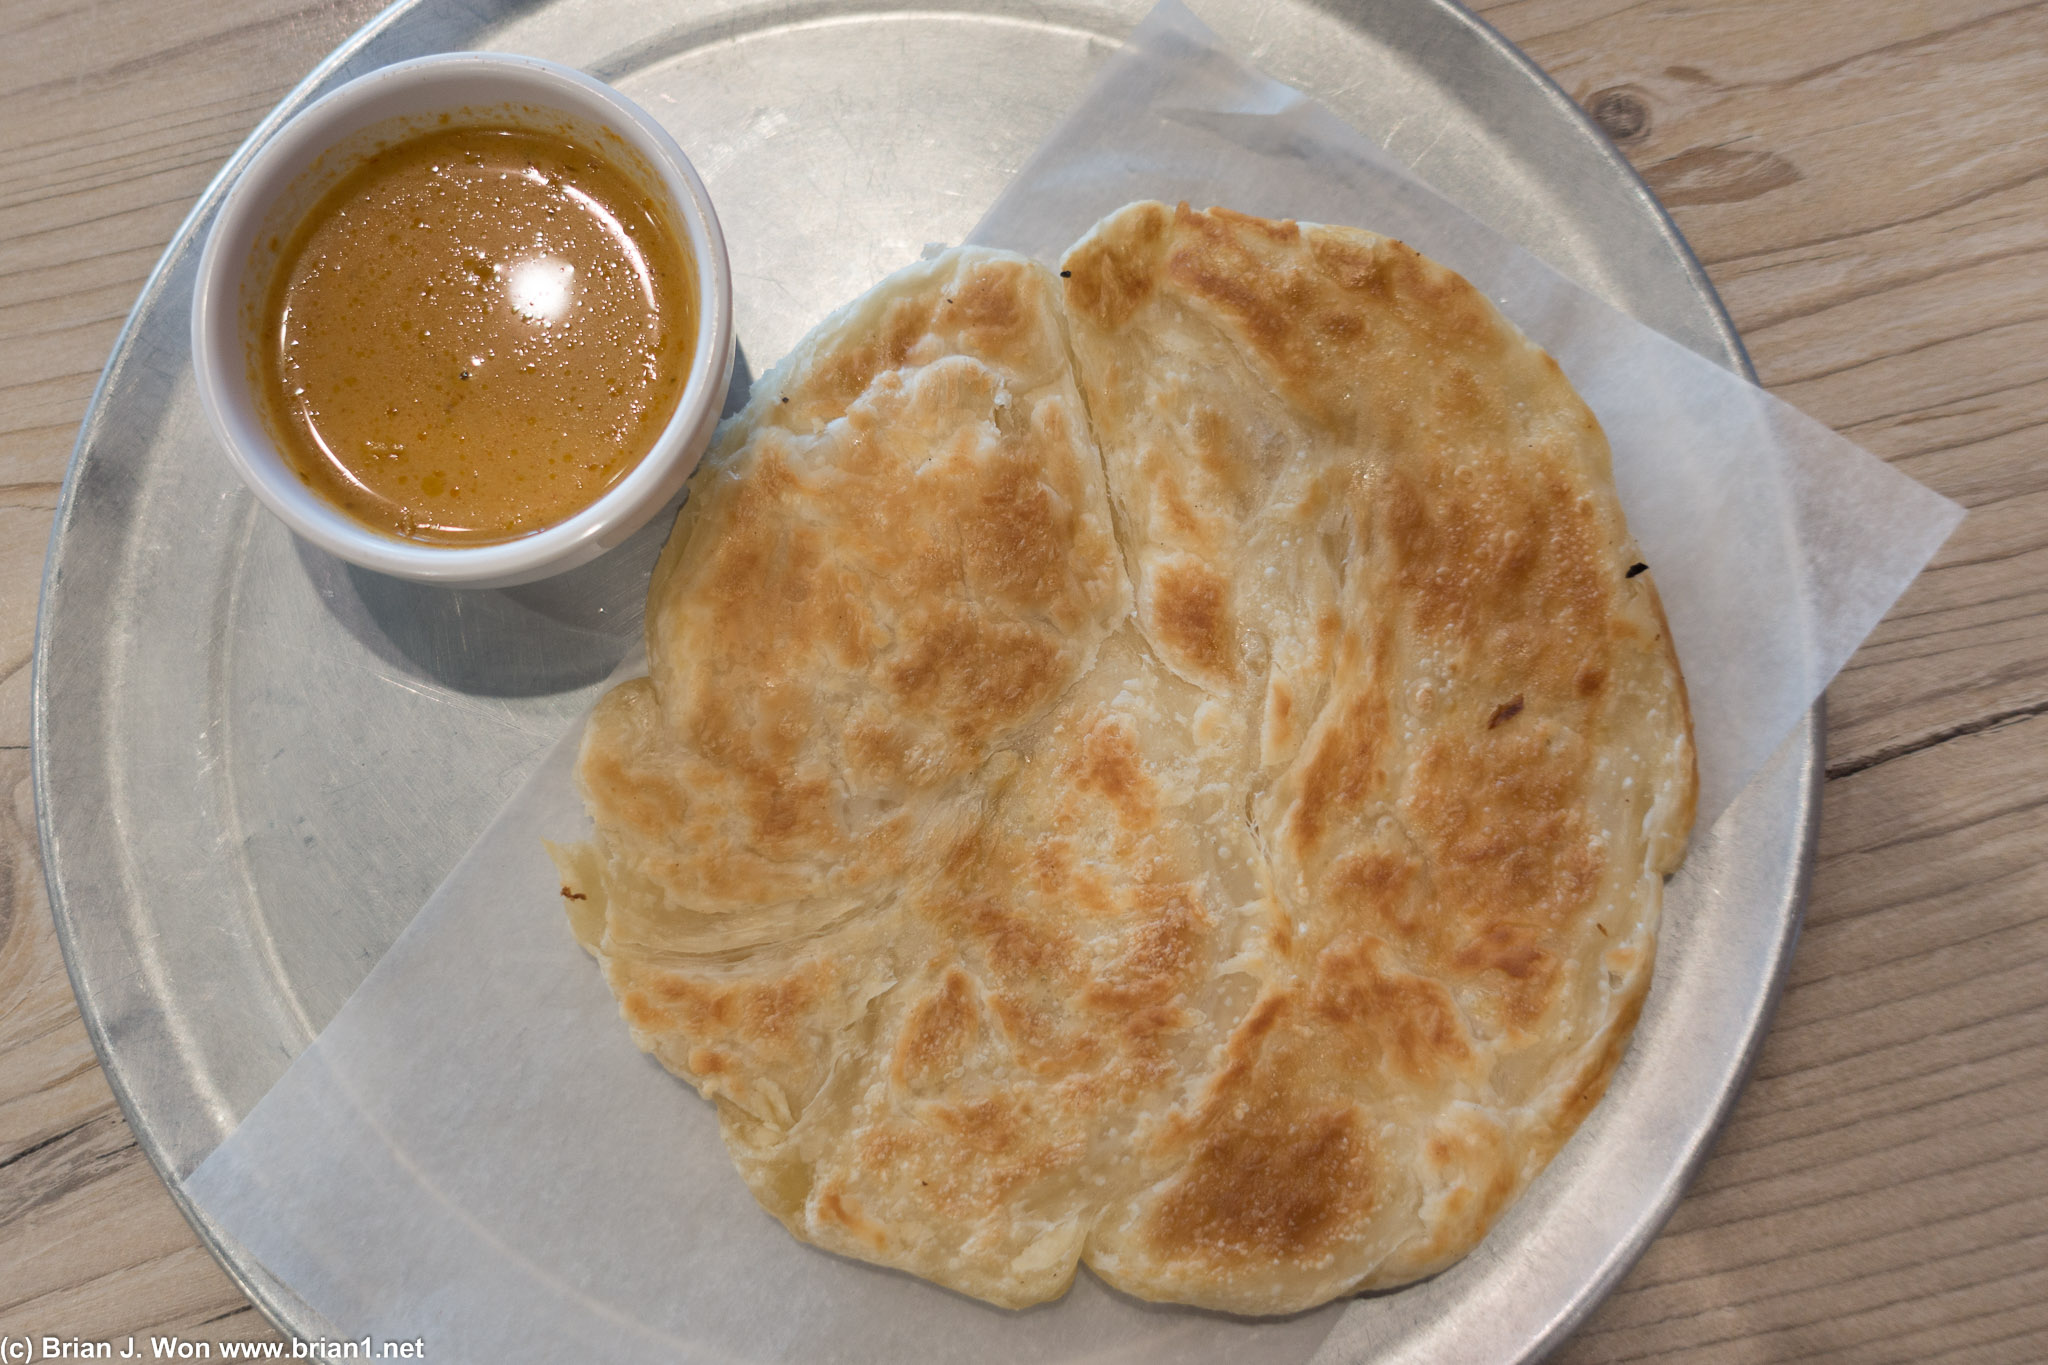 Roti. Good but nothing special.